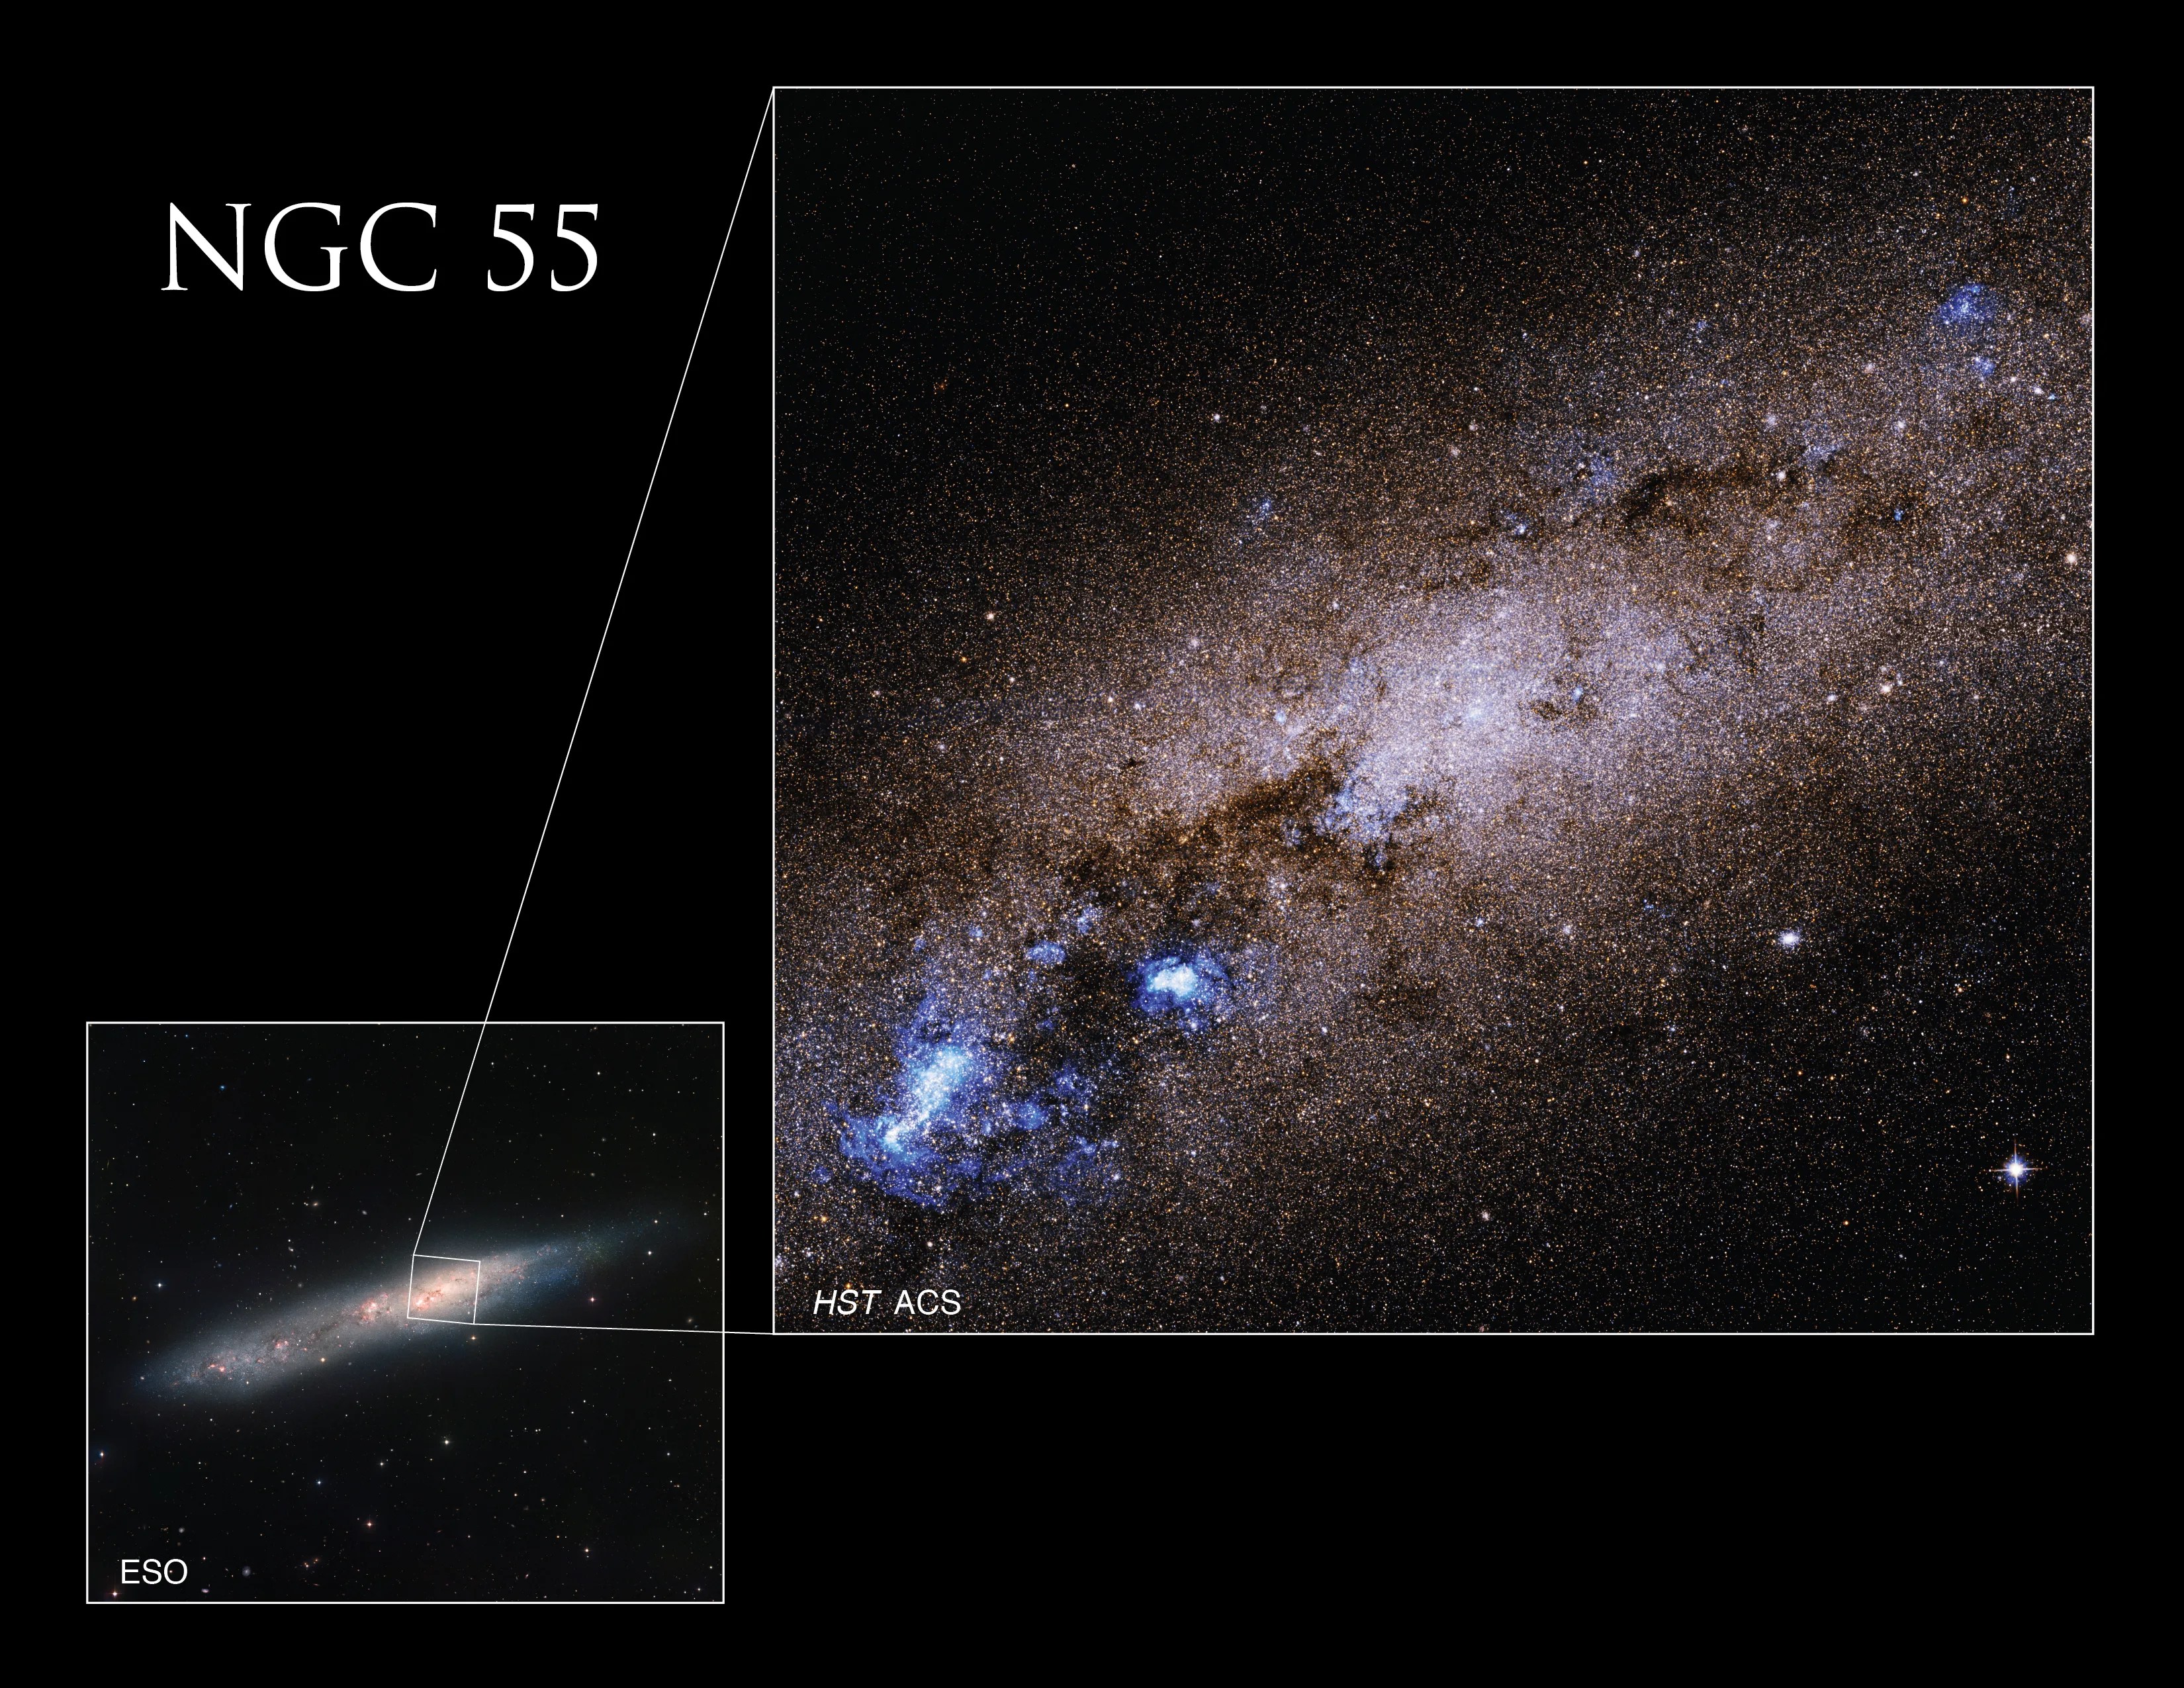 The image of C72's galactic center is shown to be inset from a flat spiral galaxy.